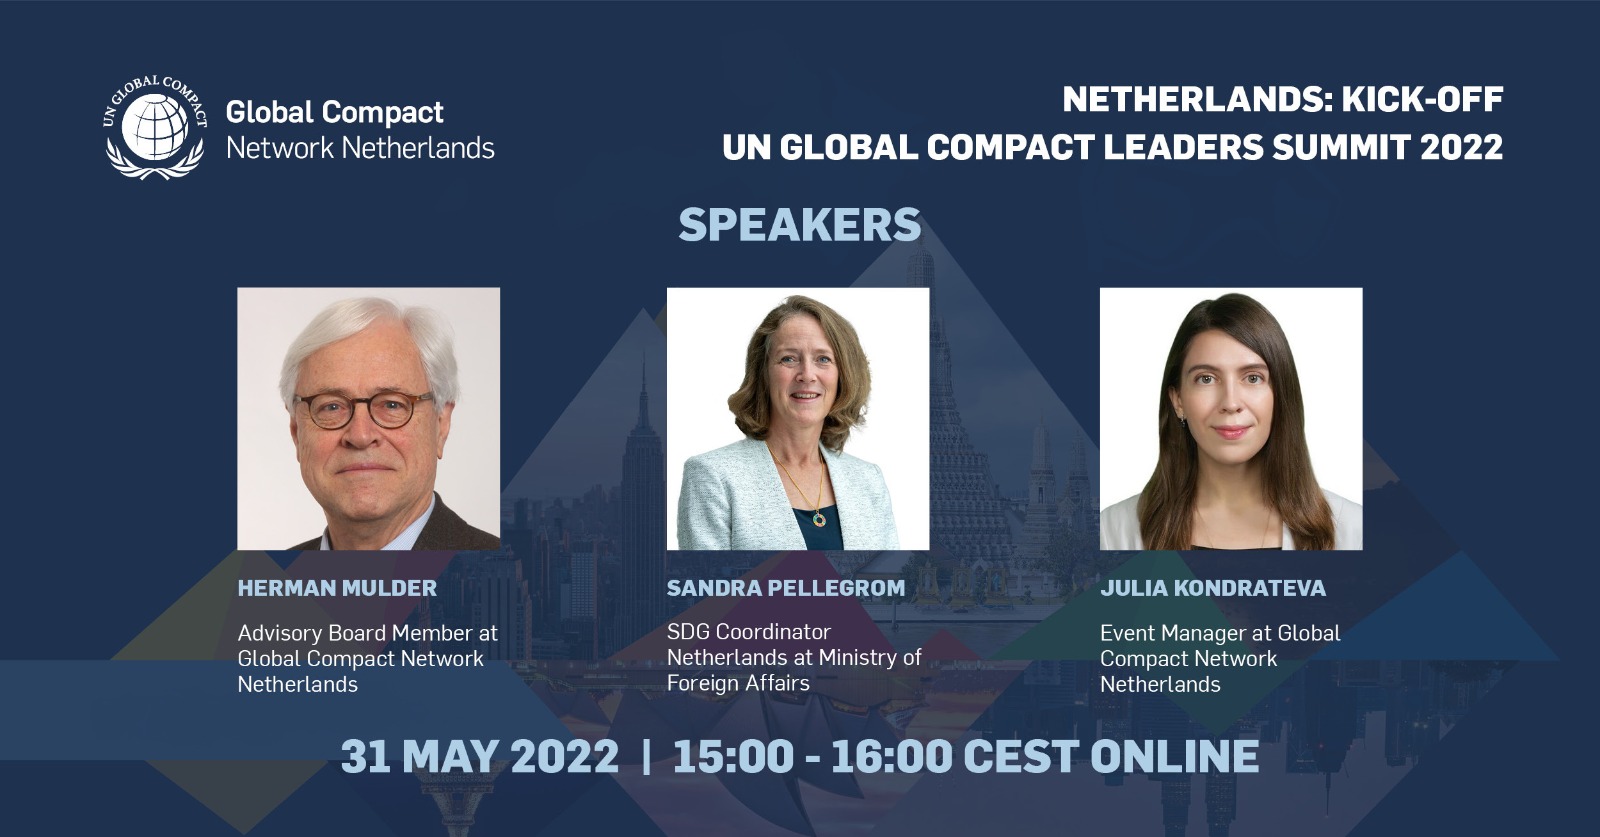 The Netherlands: Kick-off UN Global Compact Leaders Summit 2022